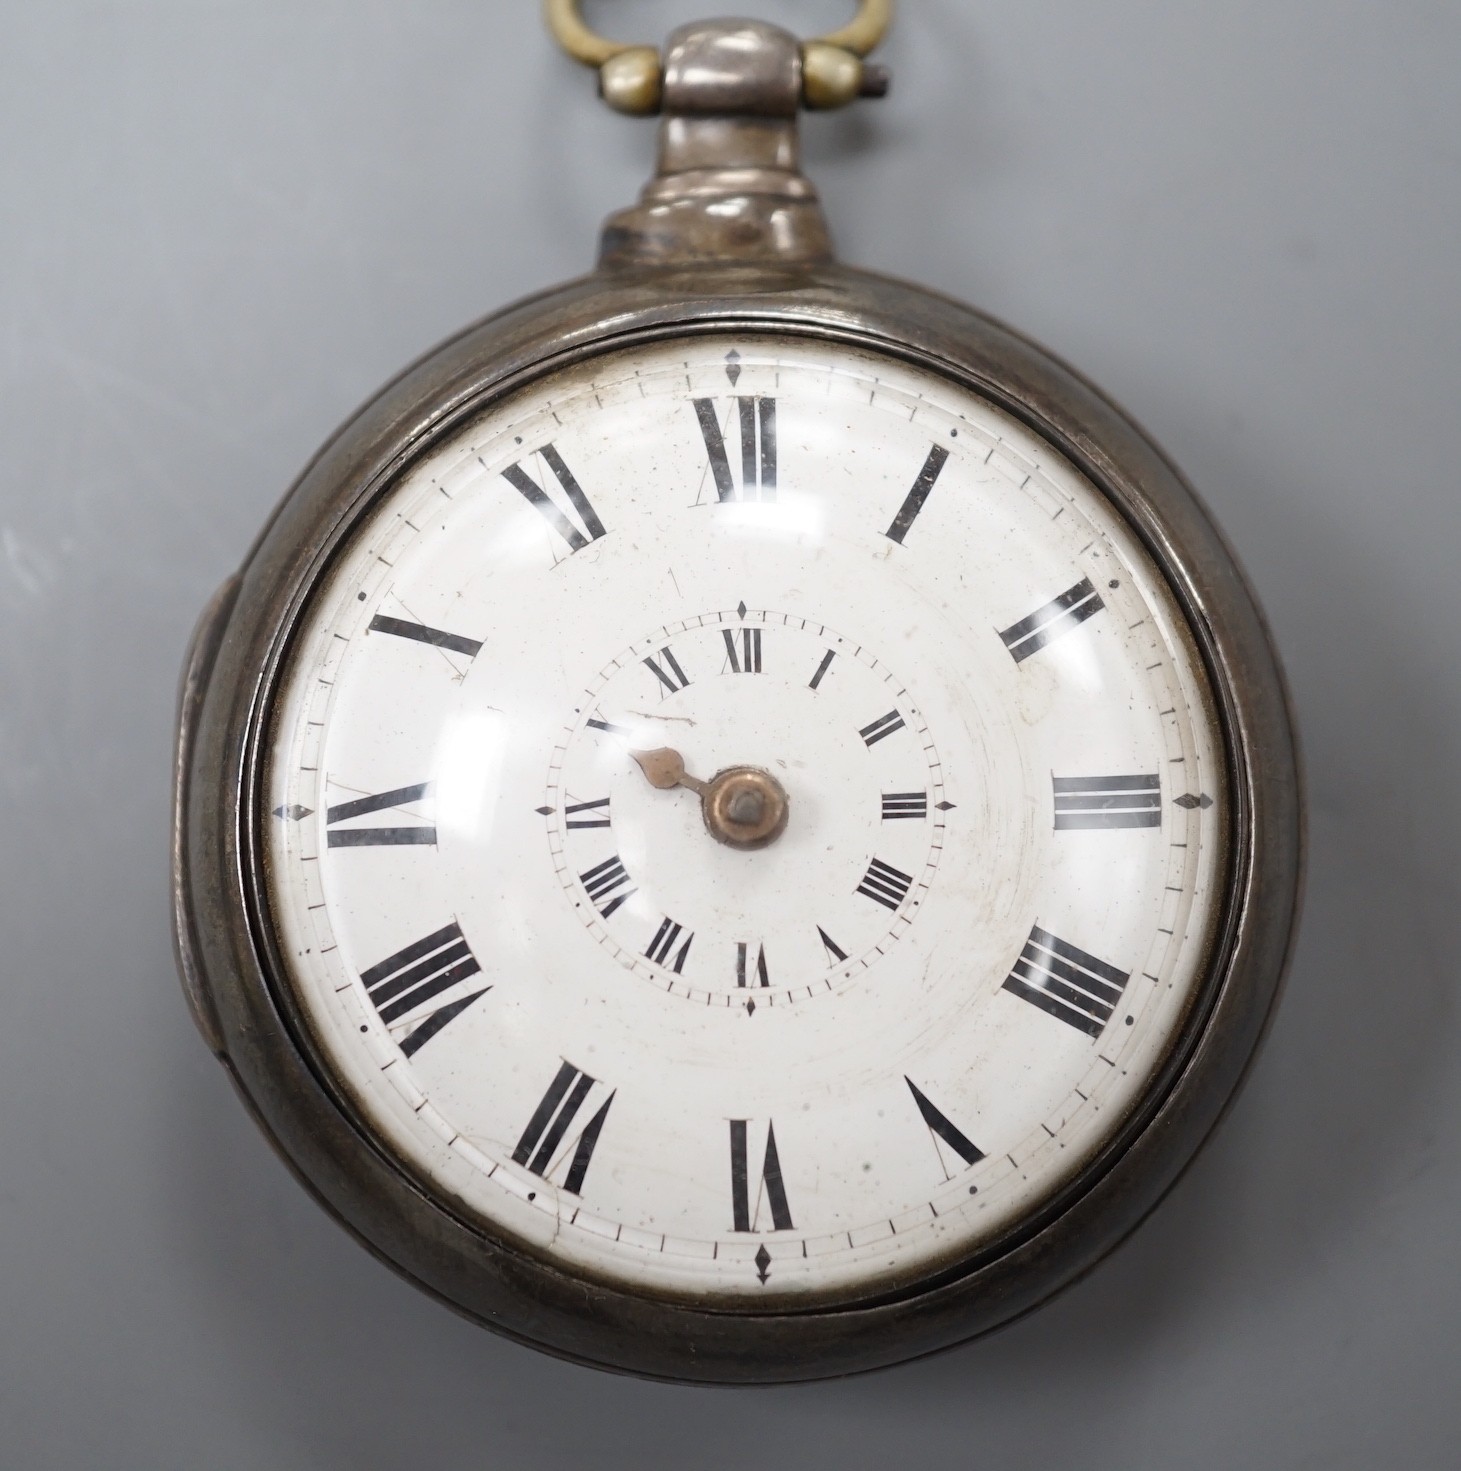 A George IV silver pair cased keywind verge pocket watch, by Thomas Phillips of Ludlow, with two Roman dials, case diameter 56mm.